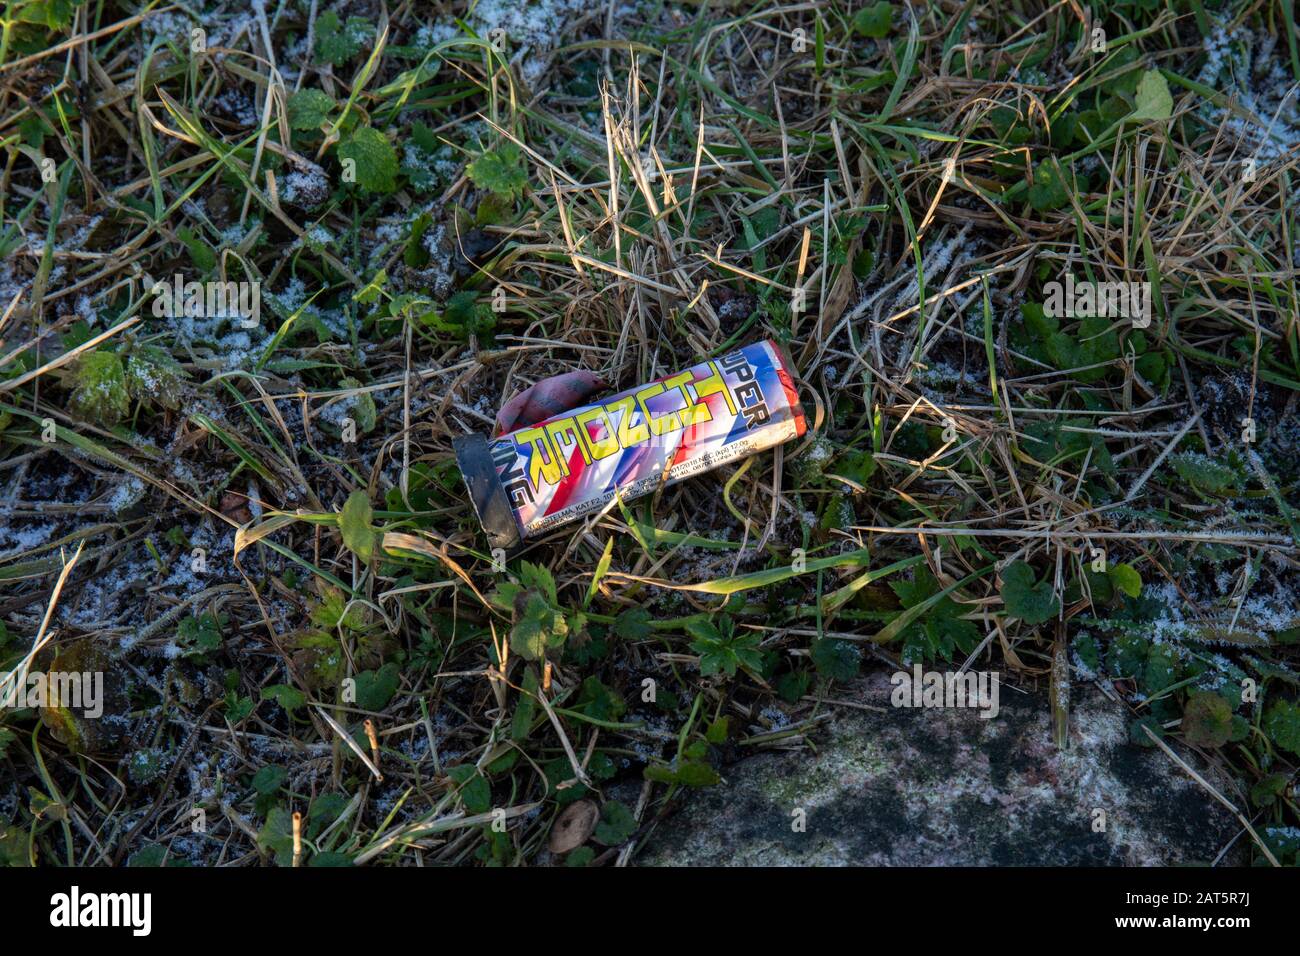 Fired Super Thunder King firework left in nature after New Year's party Stock Photo